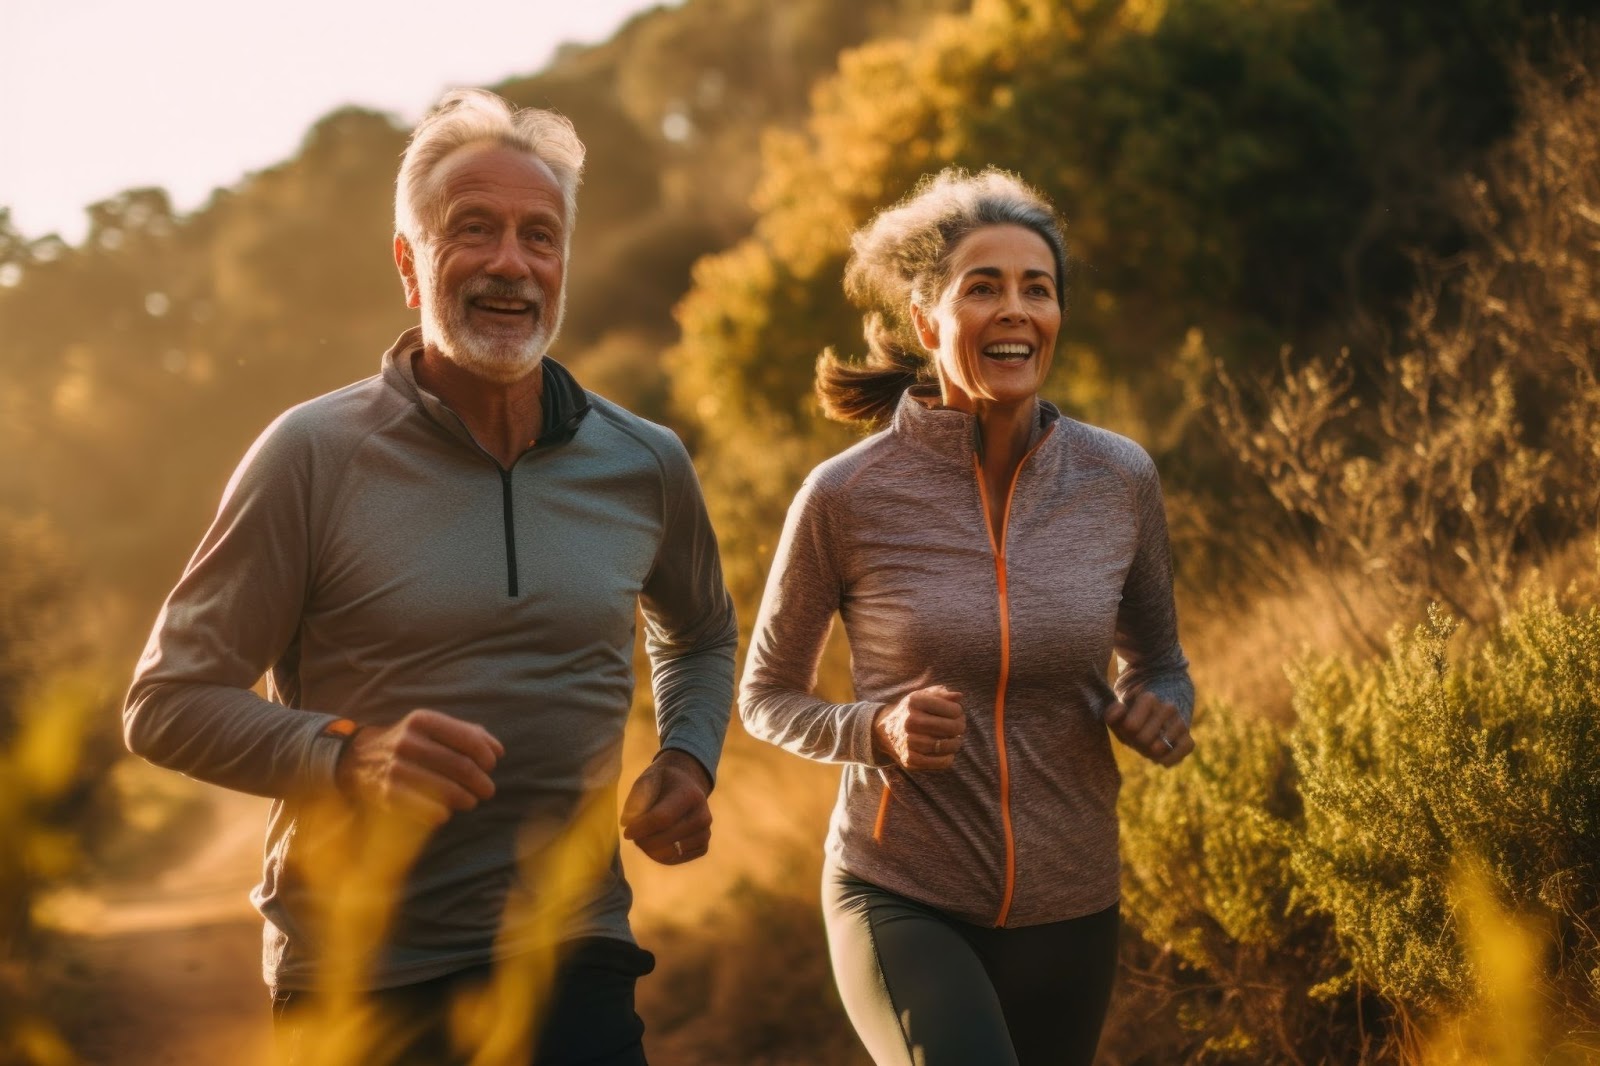 Attractive older couple going for a run